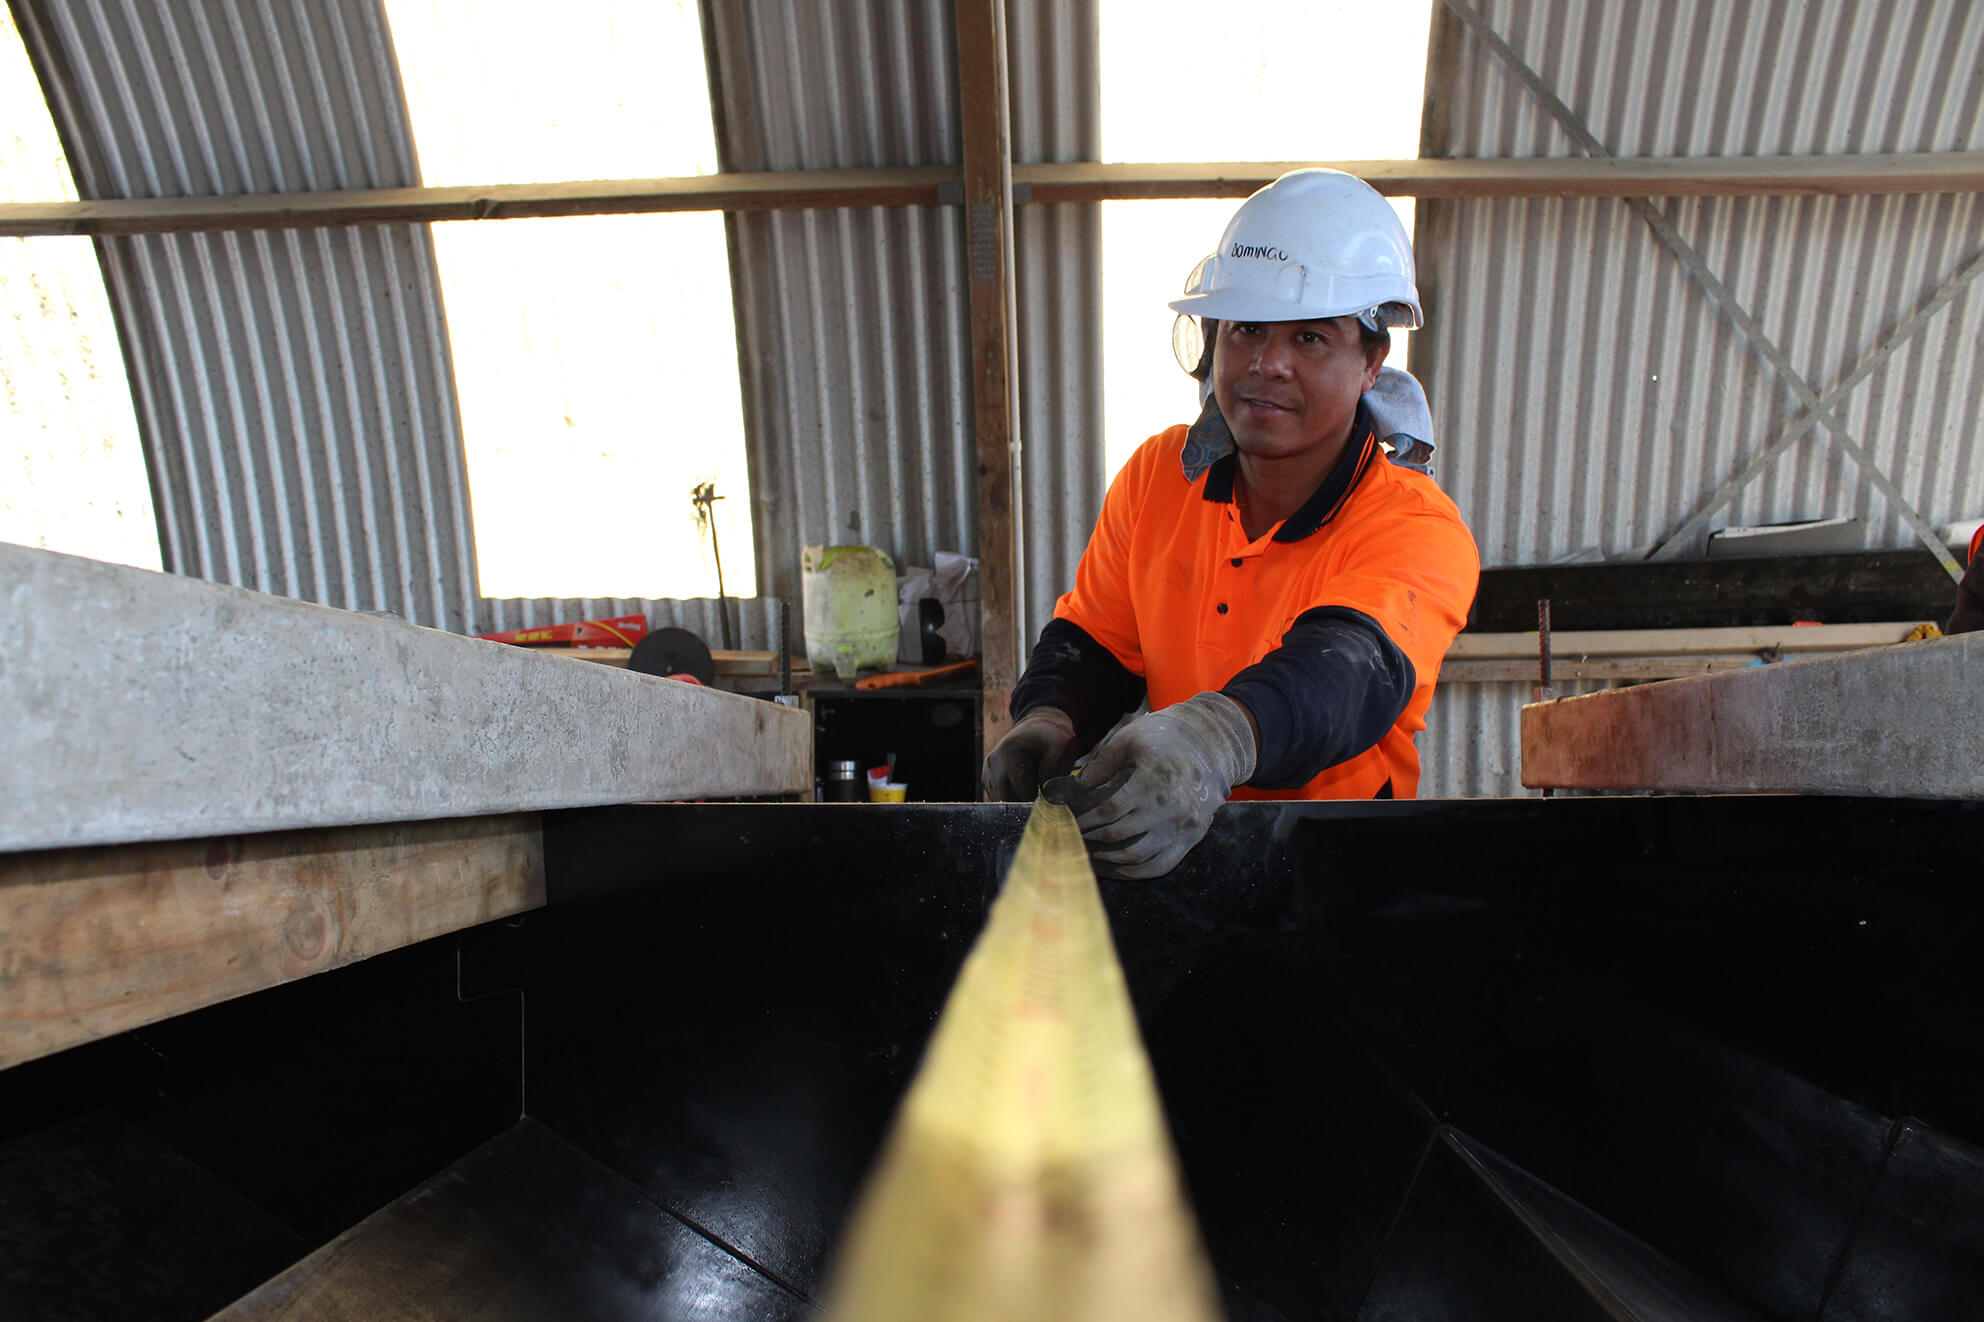 measuring precast concrete products in production